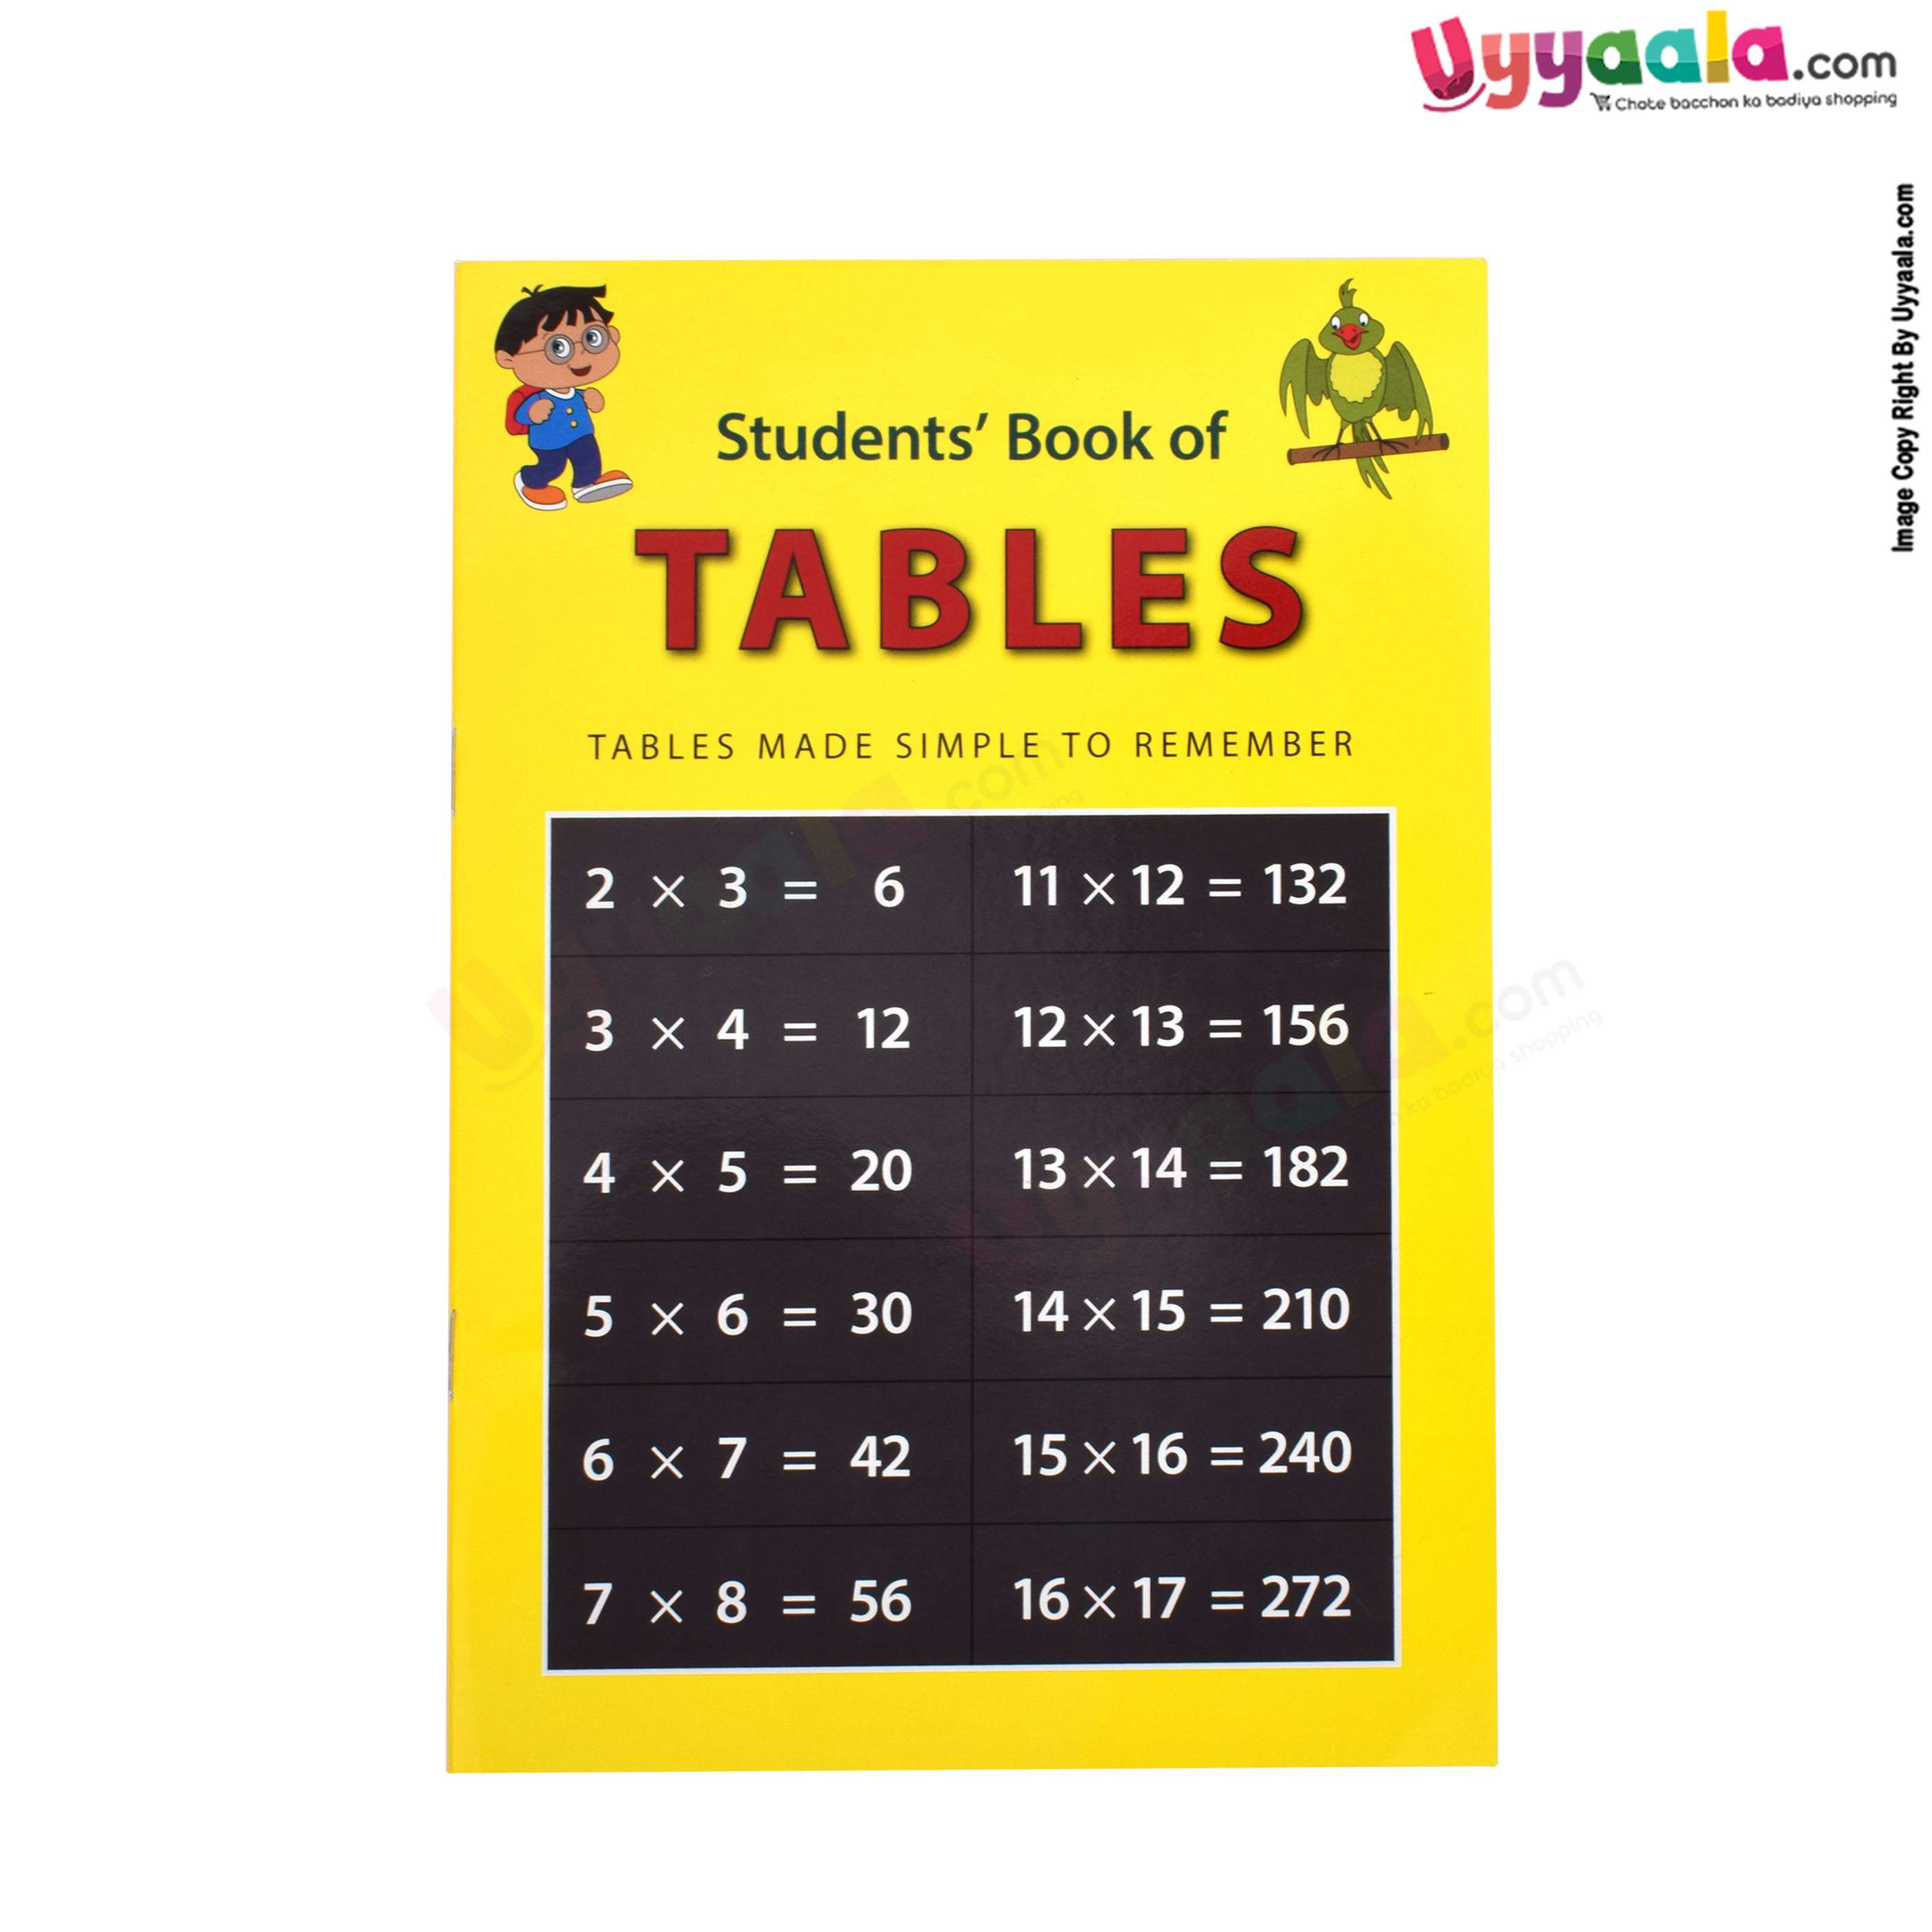 Students' book of tables - tables made simple to remember, 5 + years